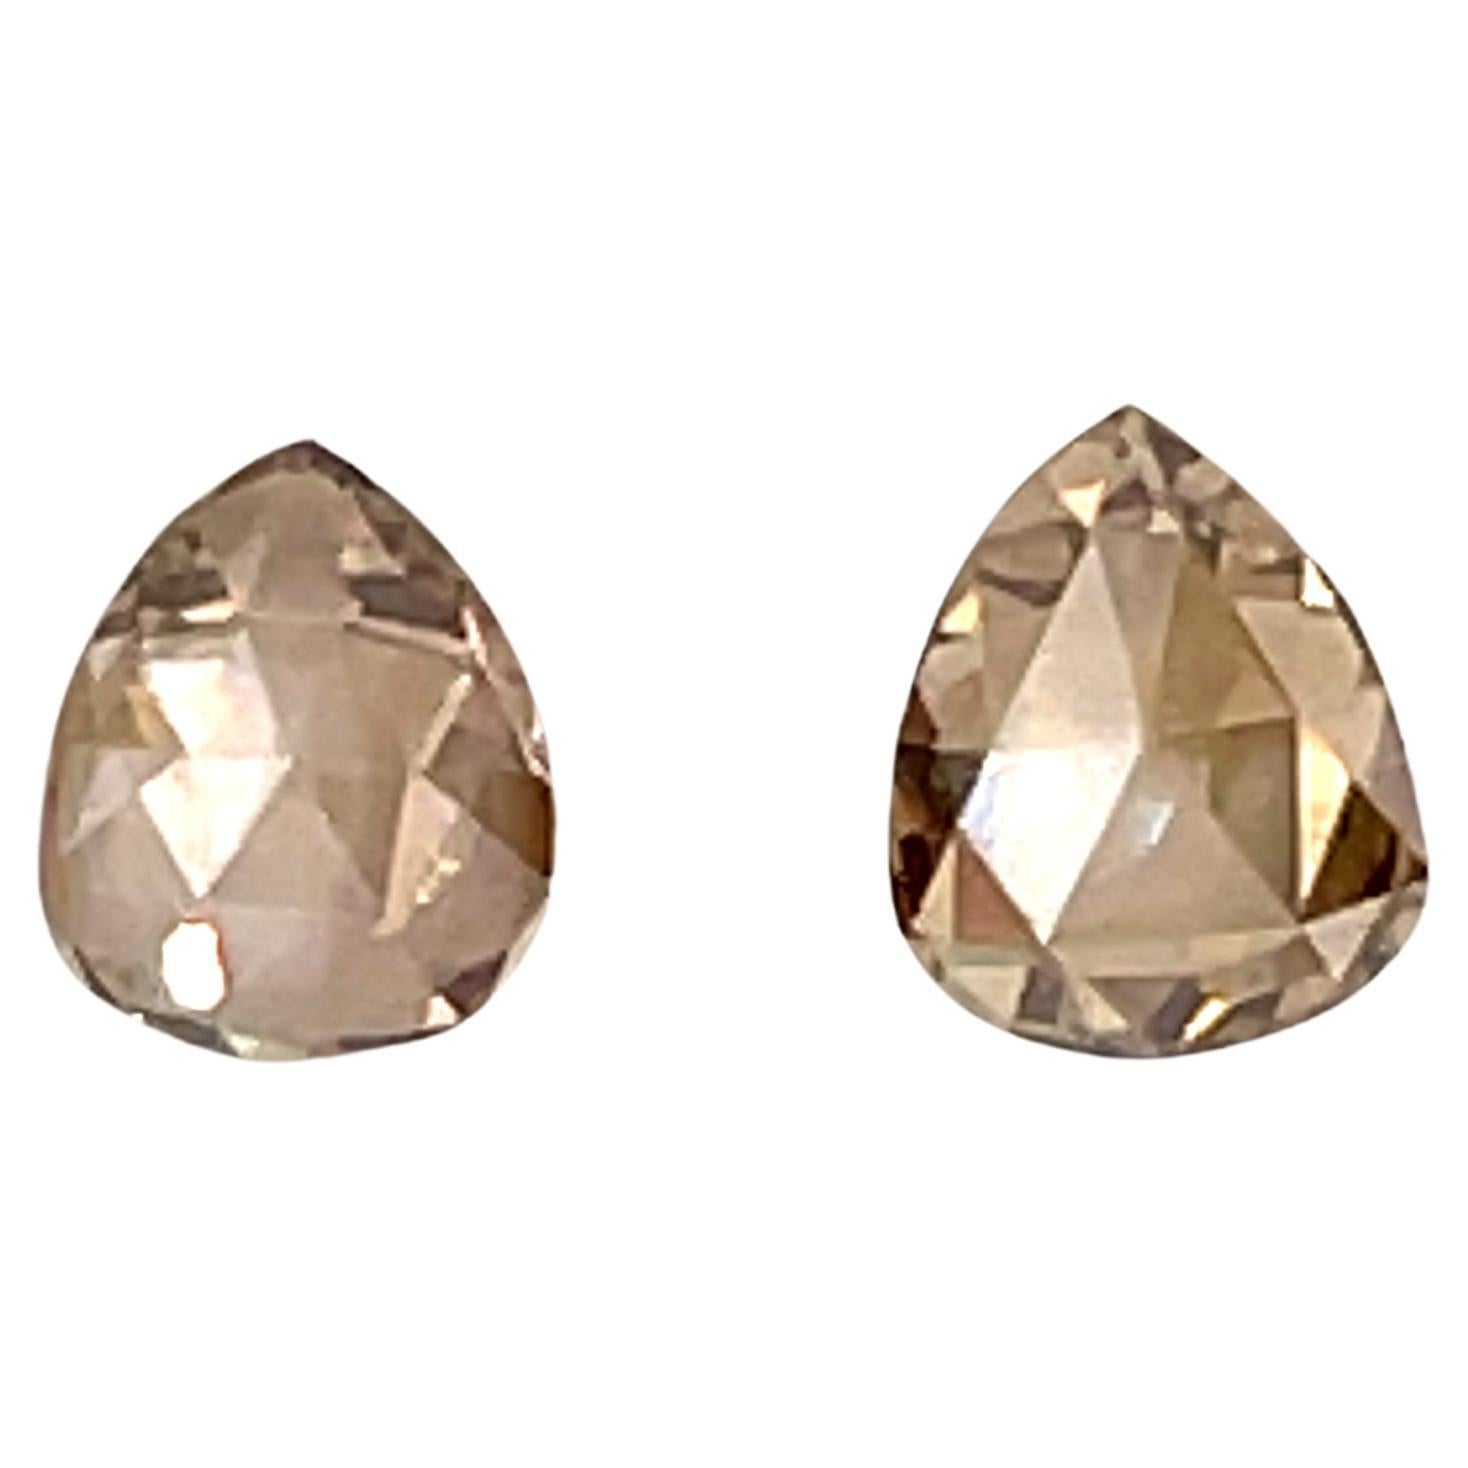 2 Pear-Shaped Brown Diamonds Cts 2.05